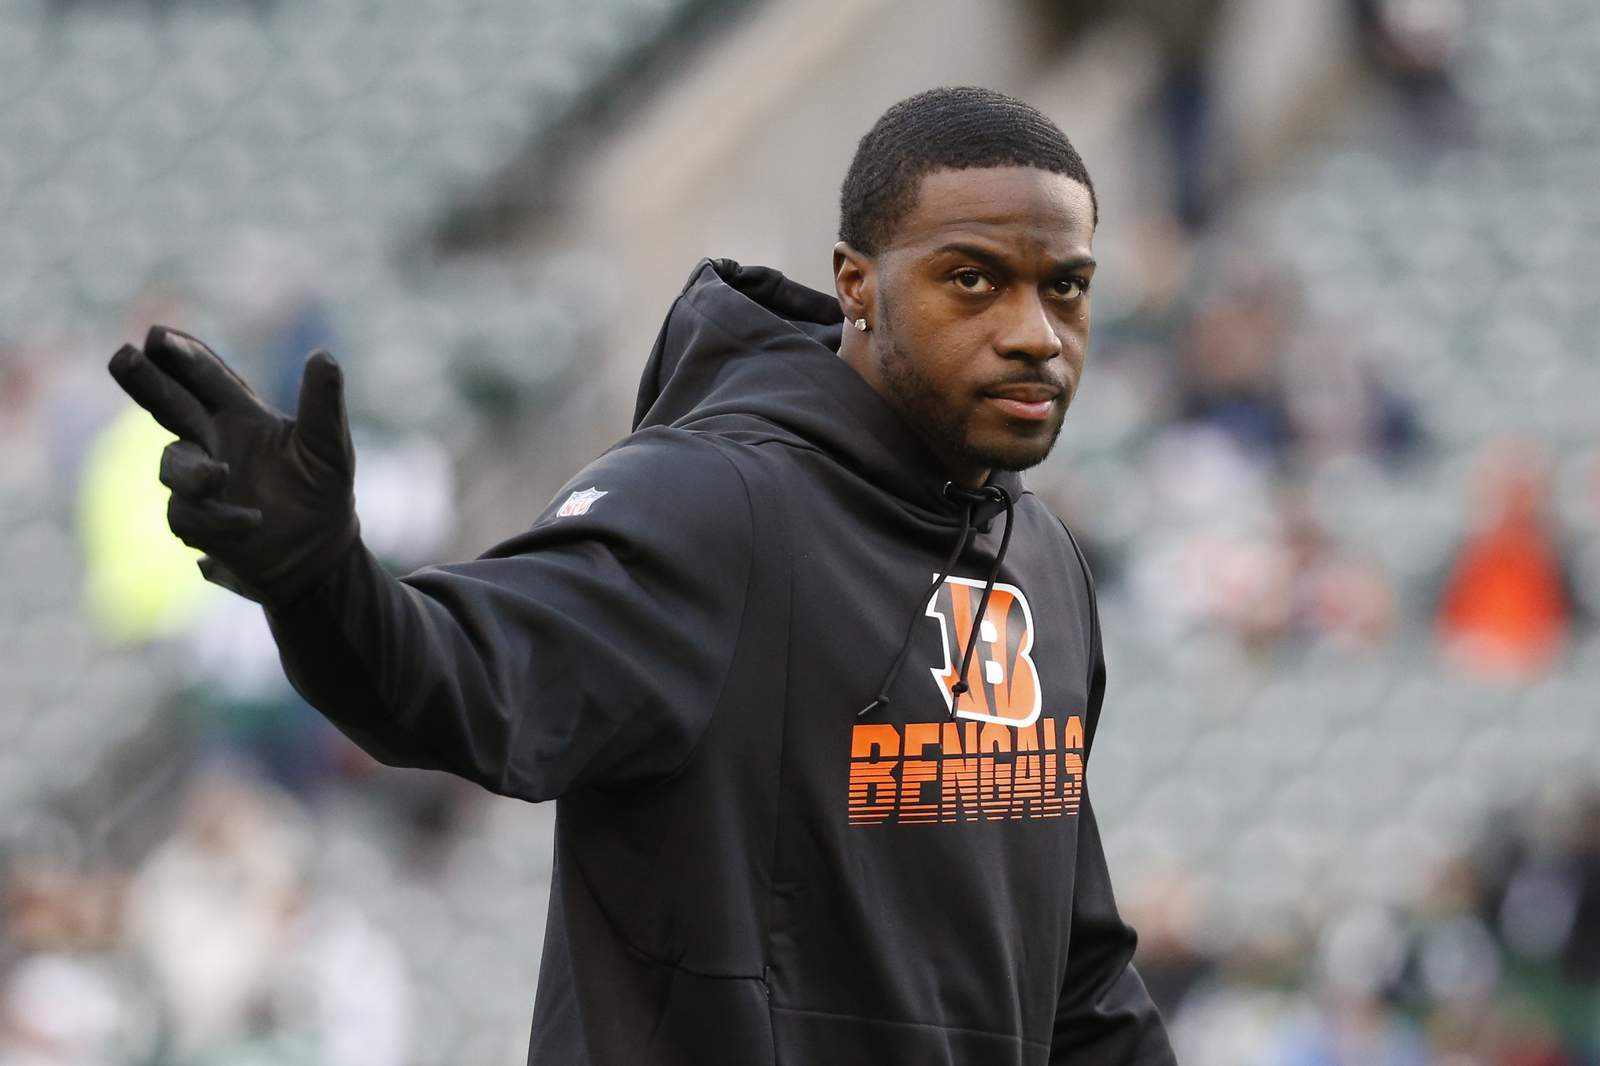 Bengals receiver A.J. Green signs 1-year franchise deal